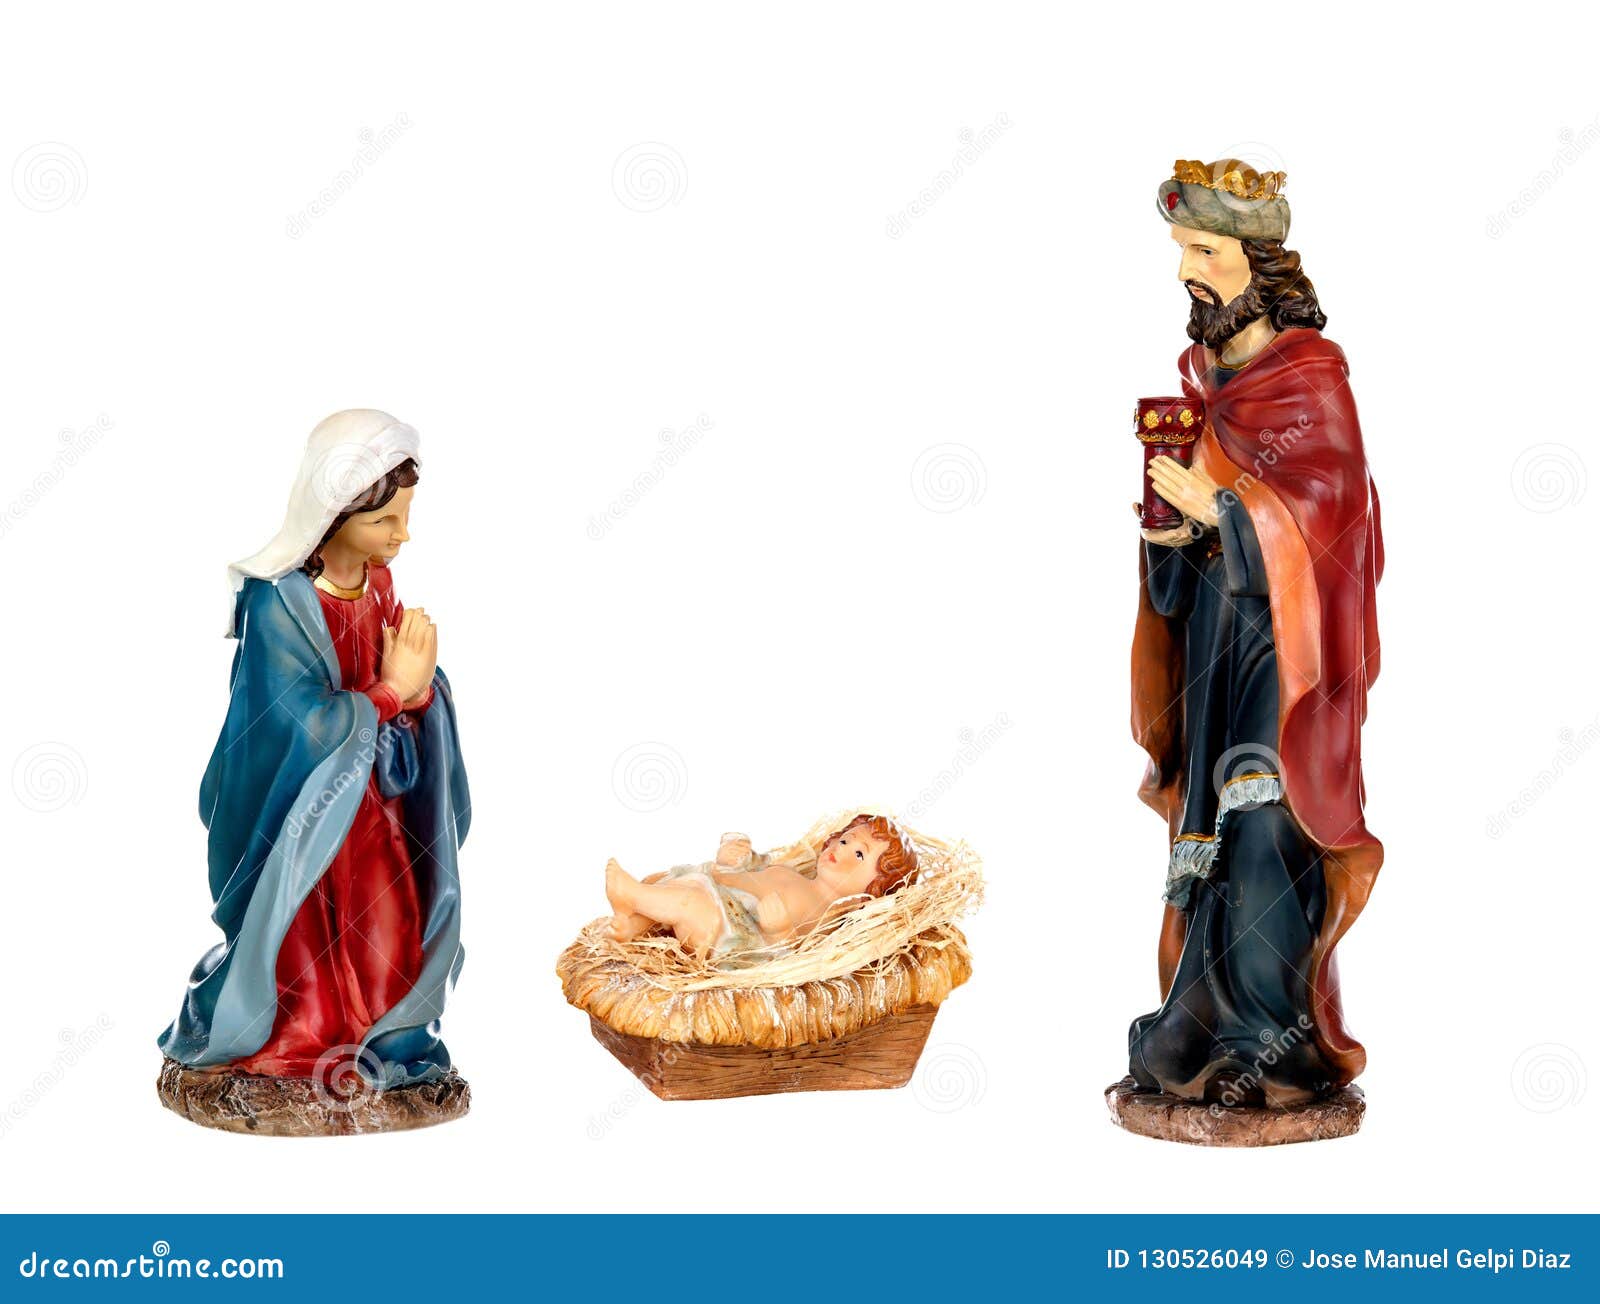 scene of the nativity: mary, baby jesus and a wise man, caspar